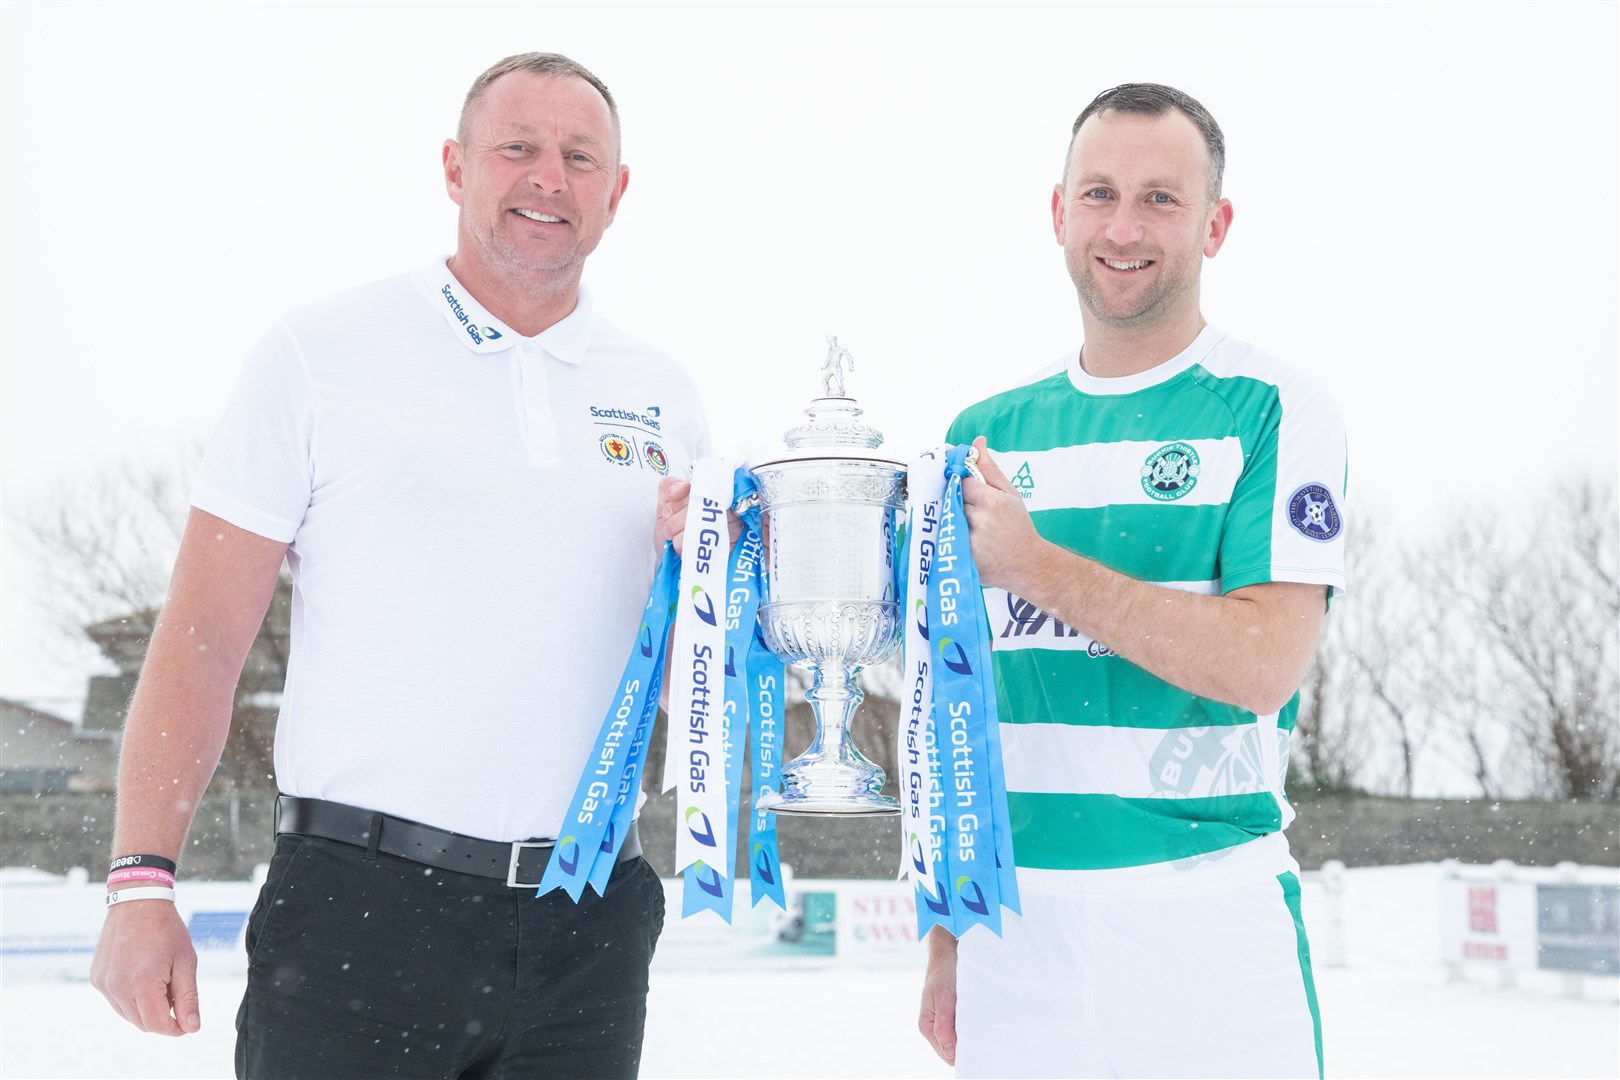 Former Celtic goalkeeper and three time Scottish Cup winner Rab Douglas (left) and Buckie Thistle striker John McLeod...The Scottish Gas Scottish Cup arrives at a snow-covered Victoria Park ahead of Buckie Thistle's fouth round match with Glasgow Celtic...Picture: Daniel Forsyth..